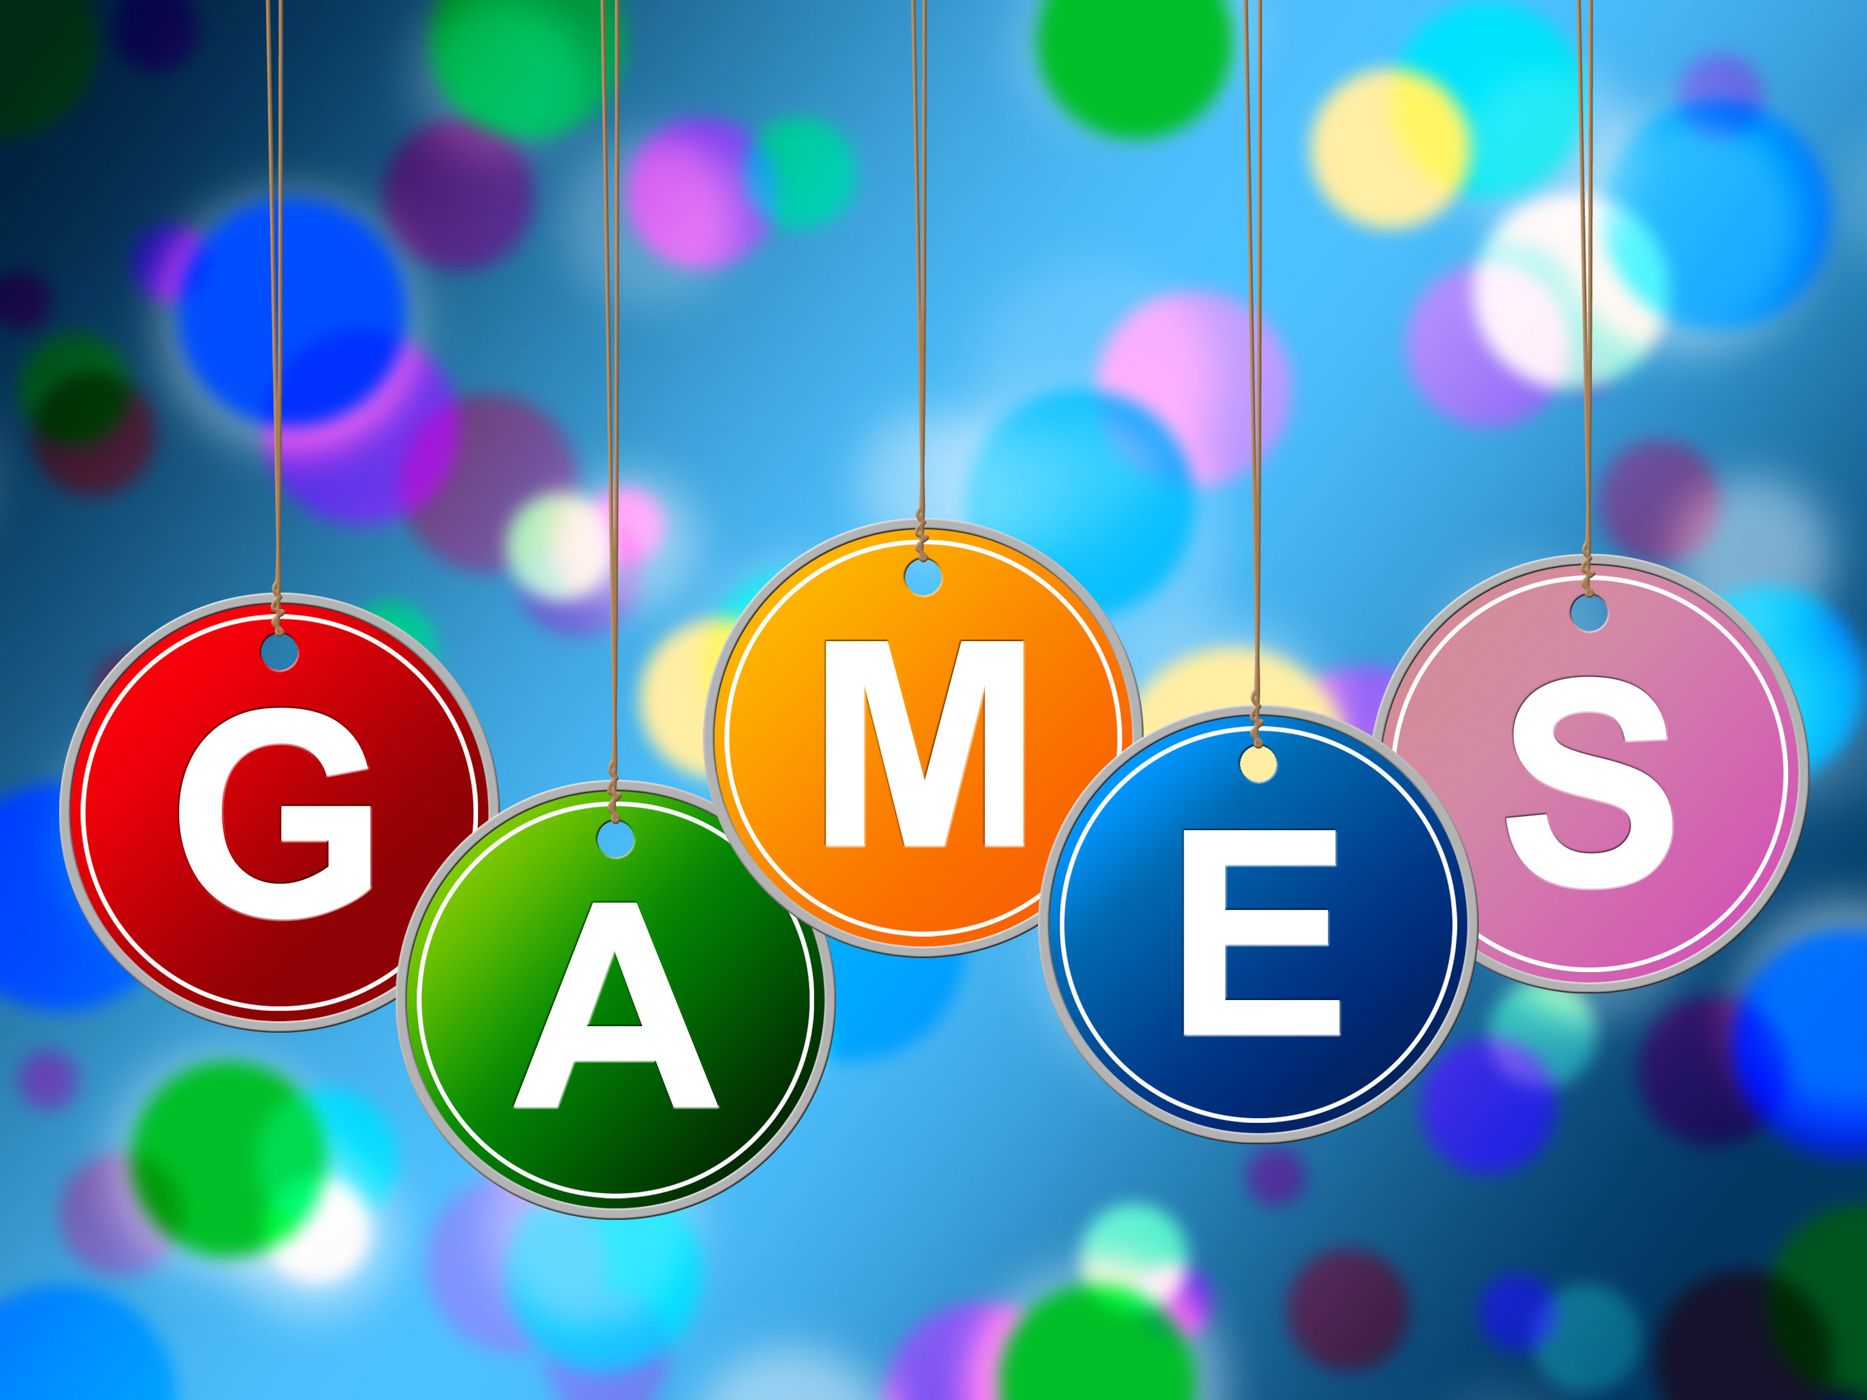 Games Play Represents Recreational Gaming And Entertainment, Entertaining, Entertainment, Fun, Game, HQ Photo